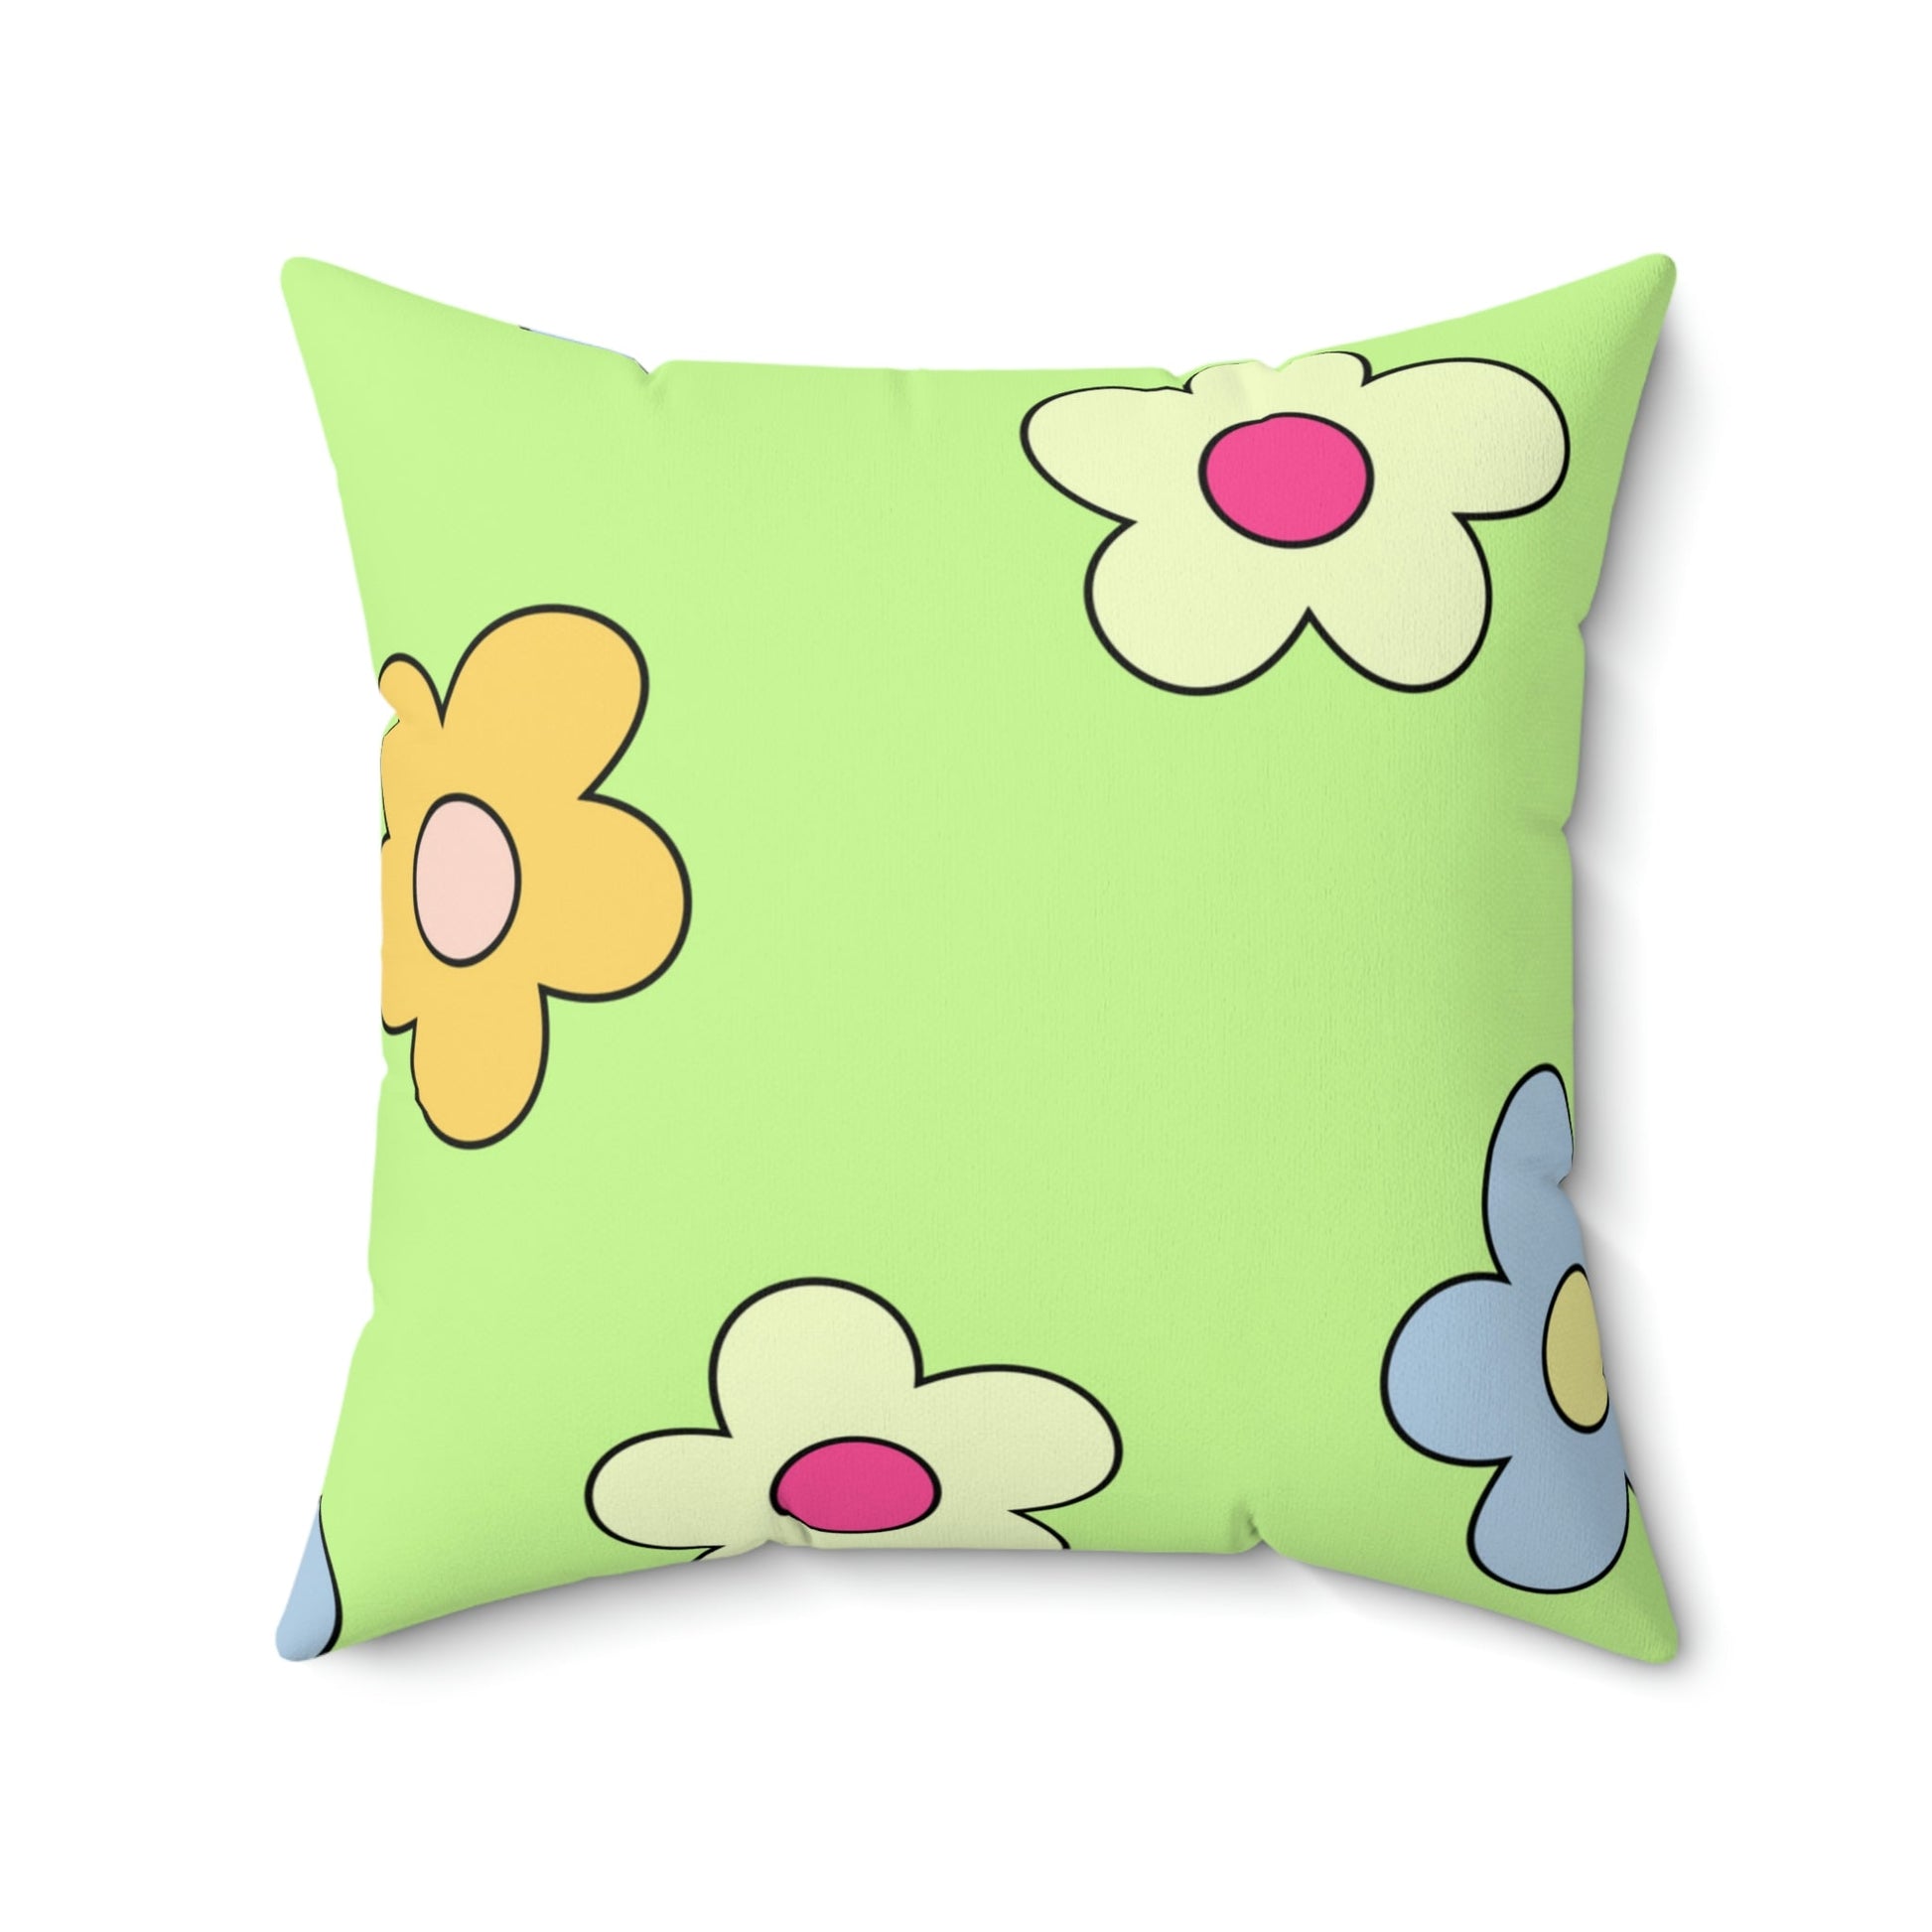 Flower Power Square Pillow Home Decor Pink Sweetheart